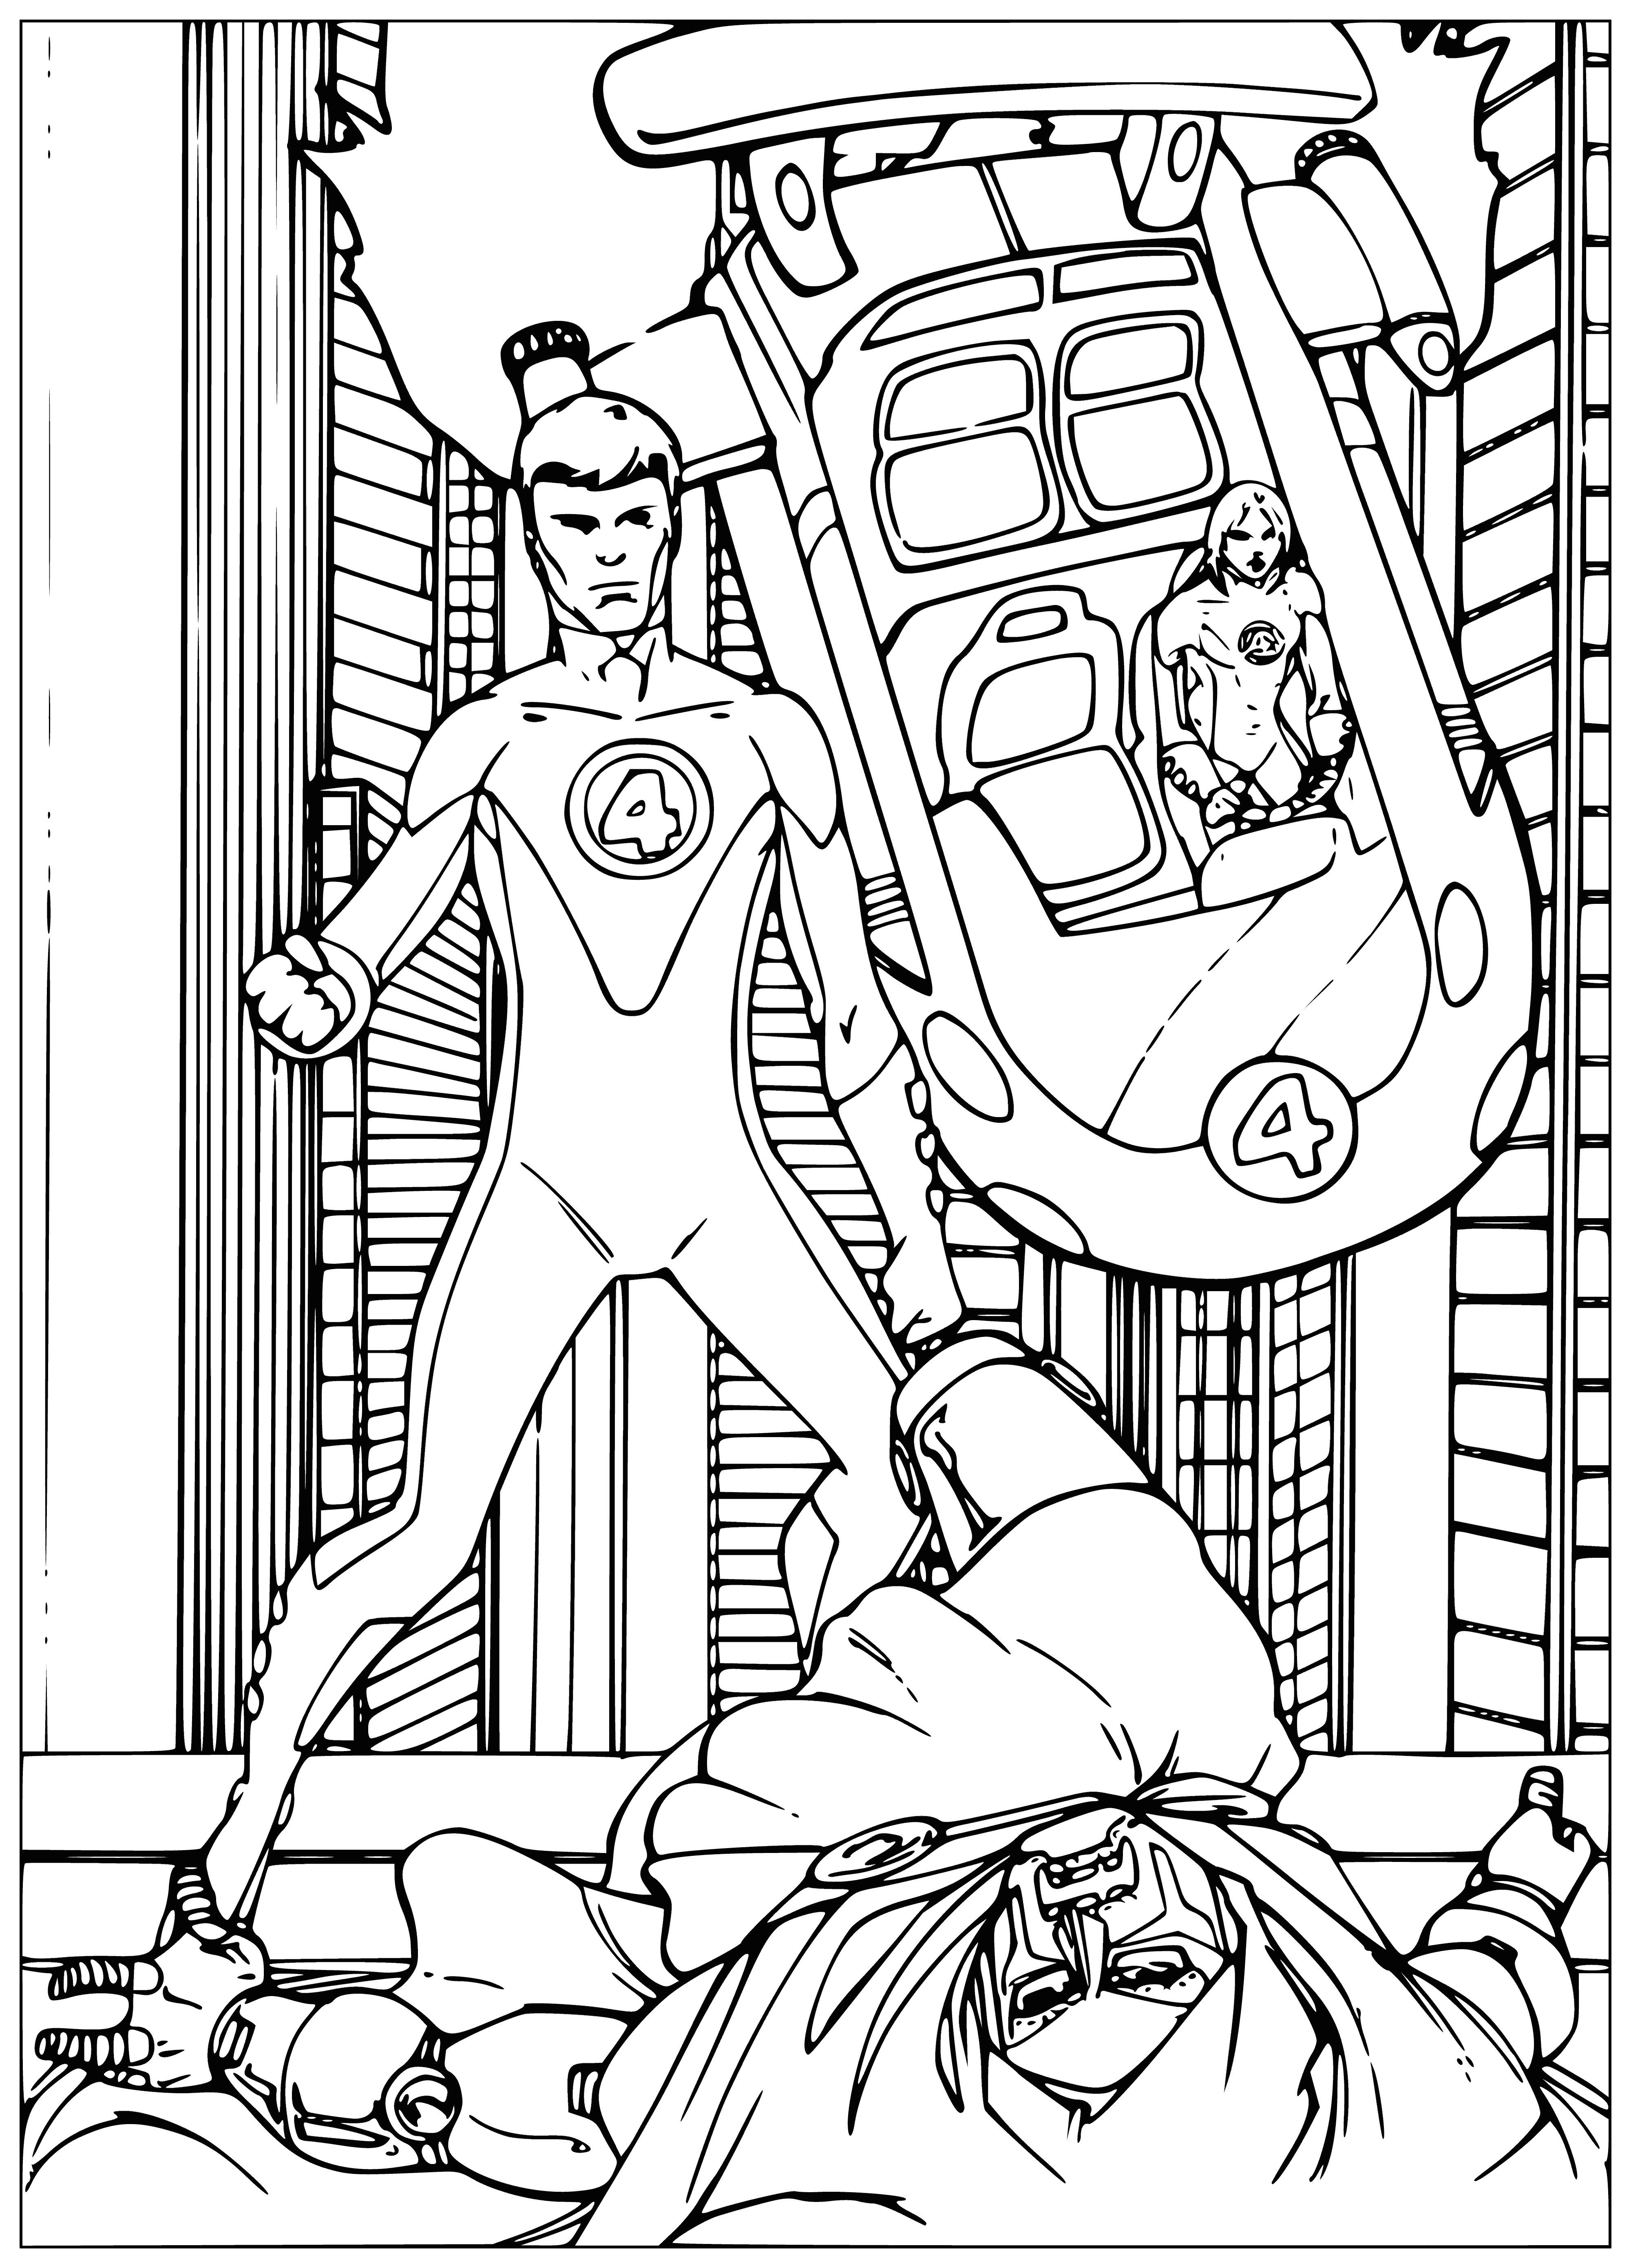 coloring page: The Fantastic Four are superheroes, led by Mr. Fantastic. They've appeared in many comics, movies & TV shows as "the first family of superheroes".